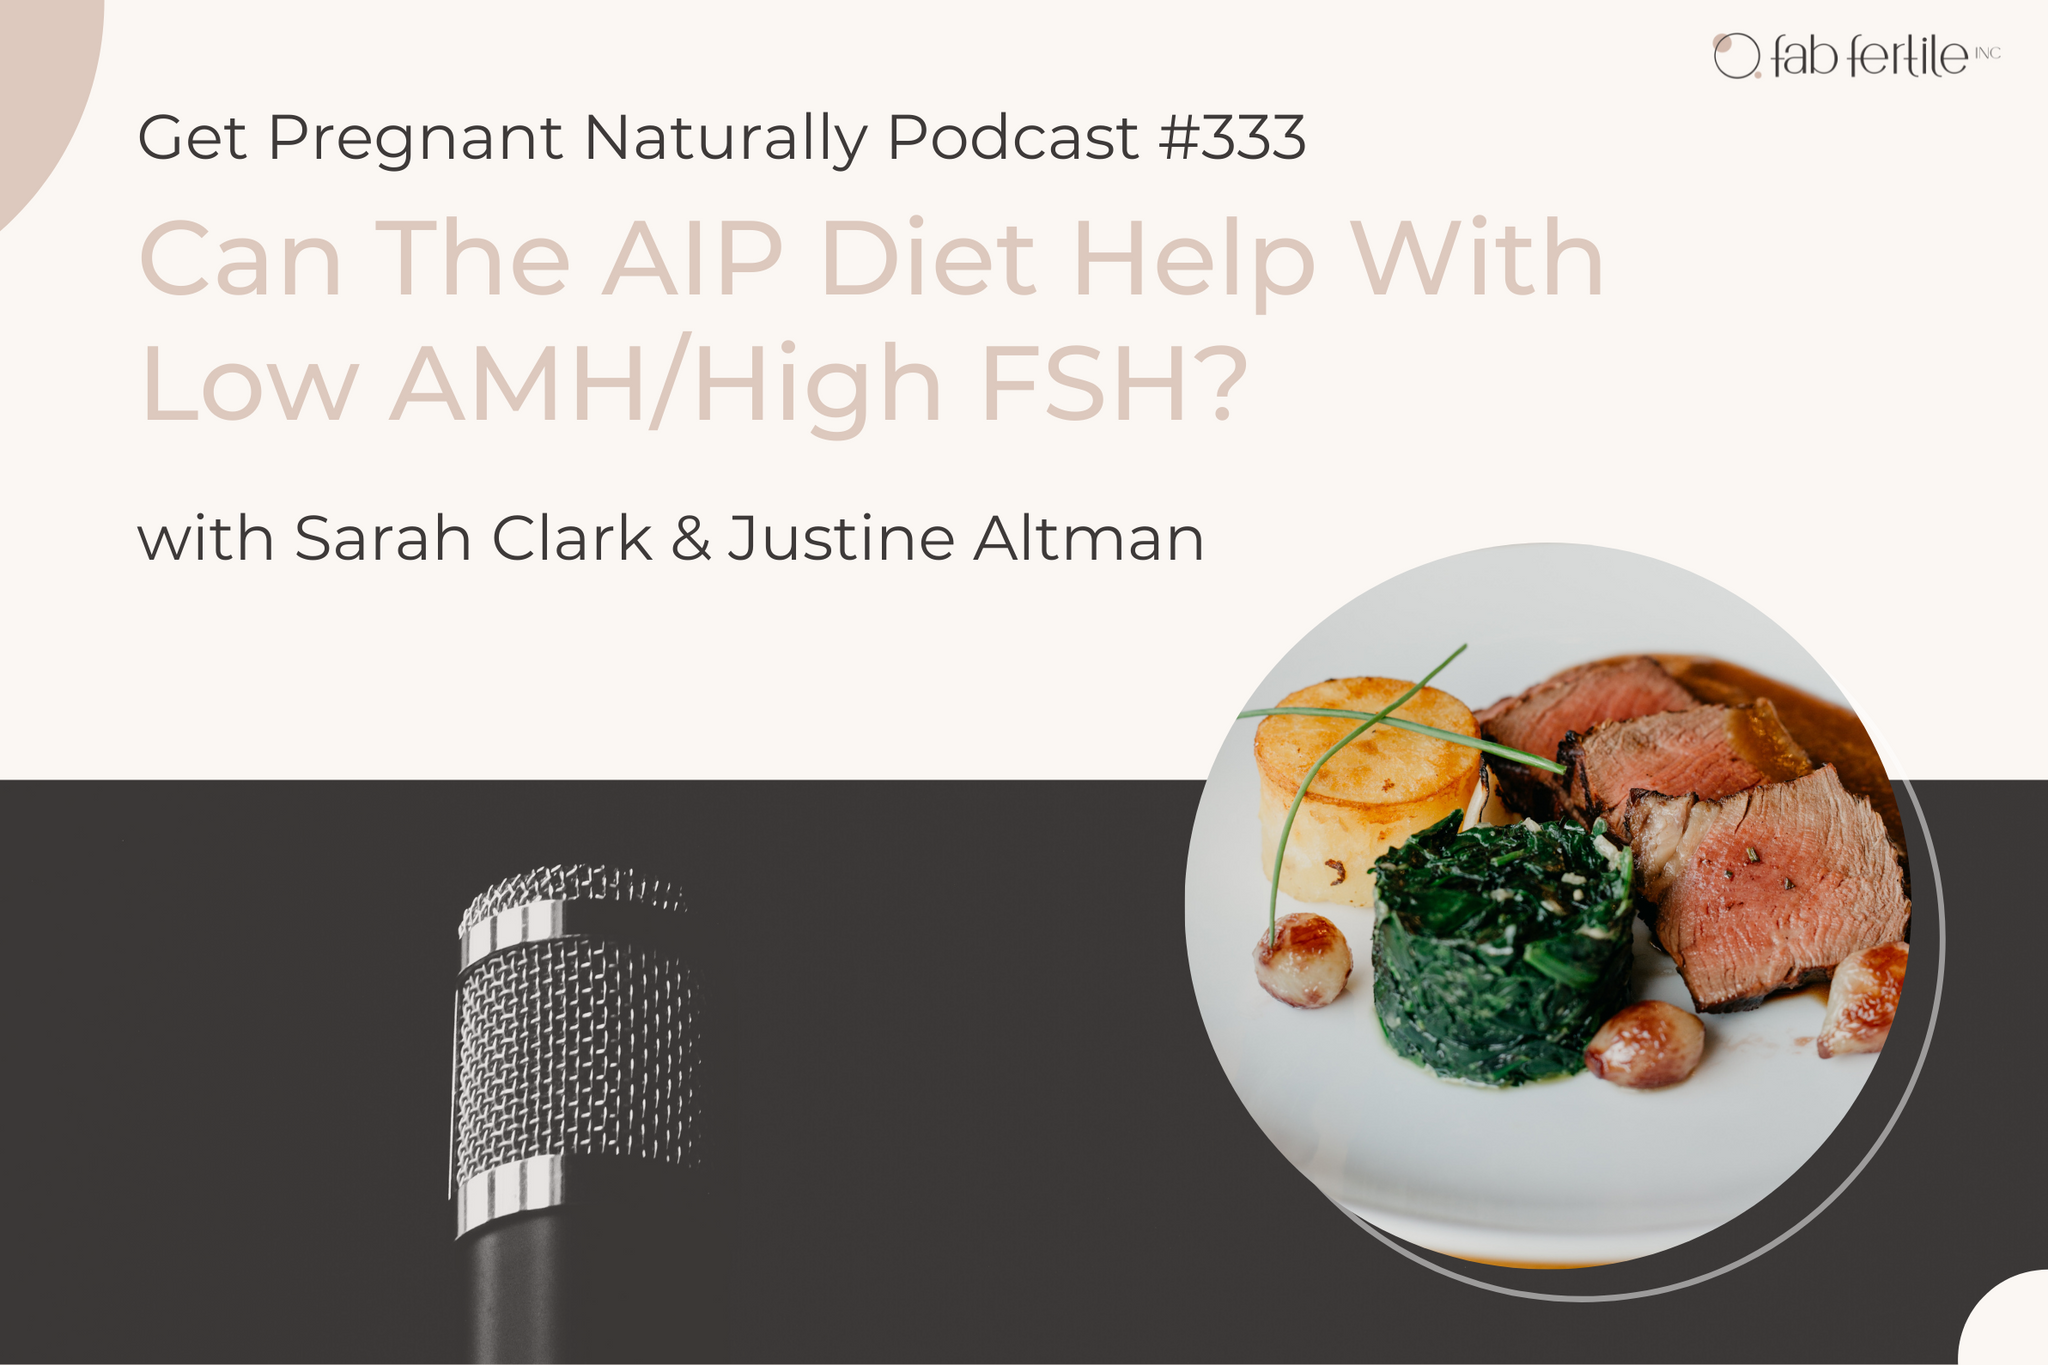 Can The AIP Diet Help With Low AMH/High FSH?